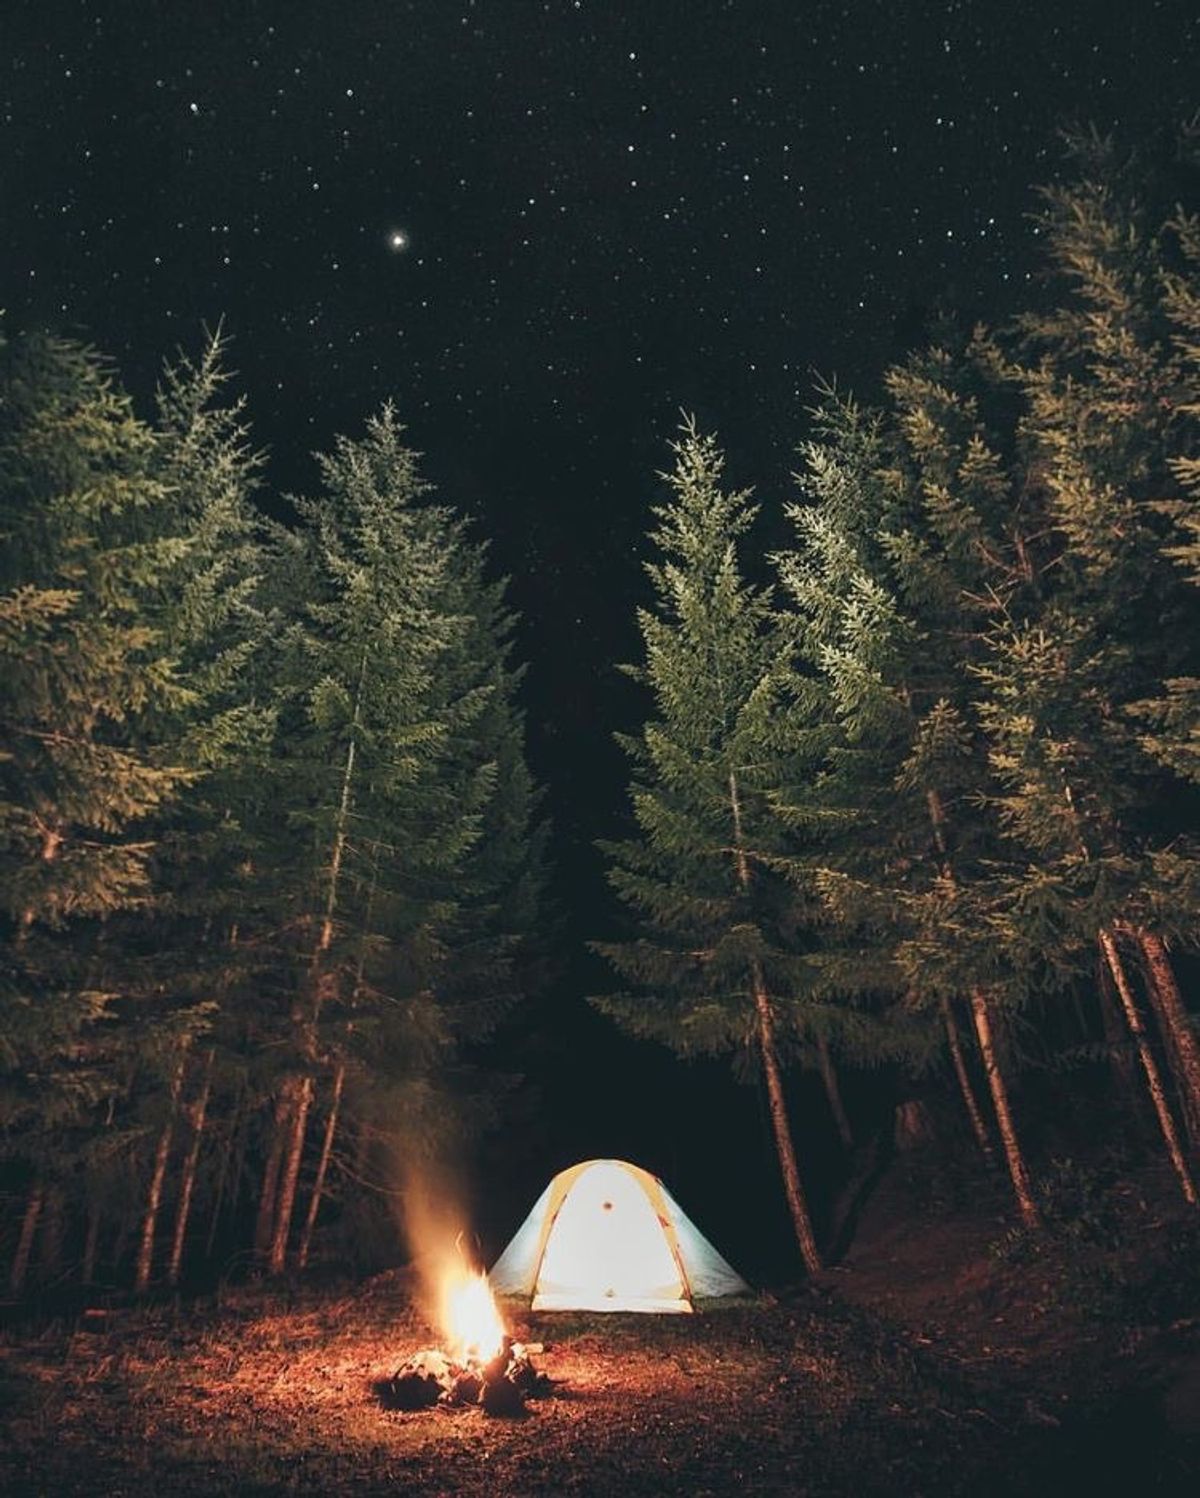 6 Reasons Your Next Vacation Should Be Camping